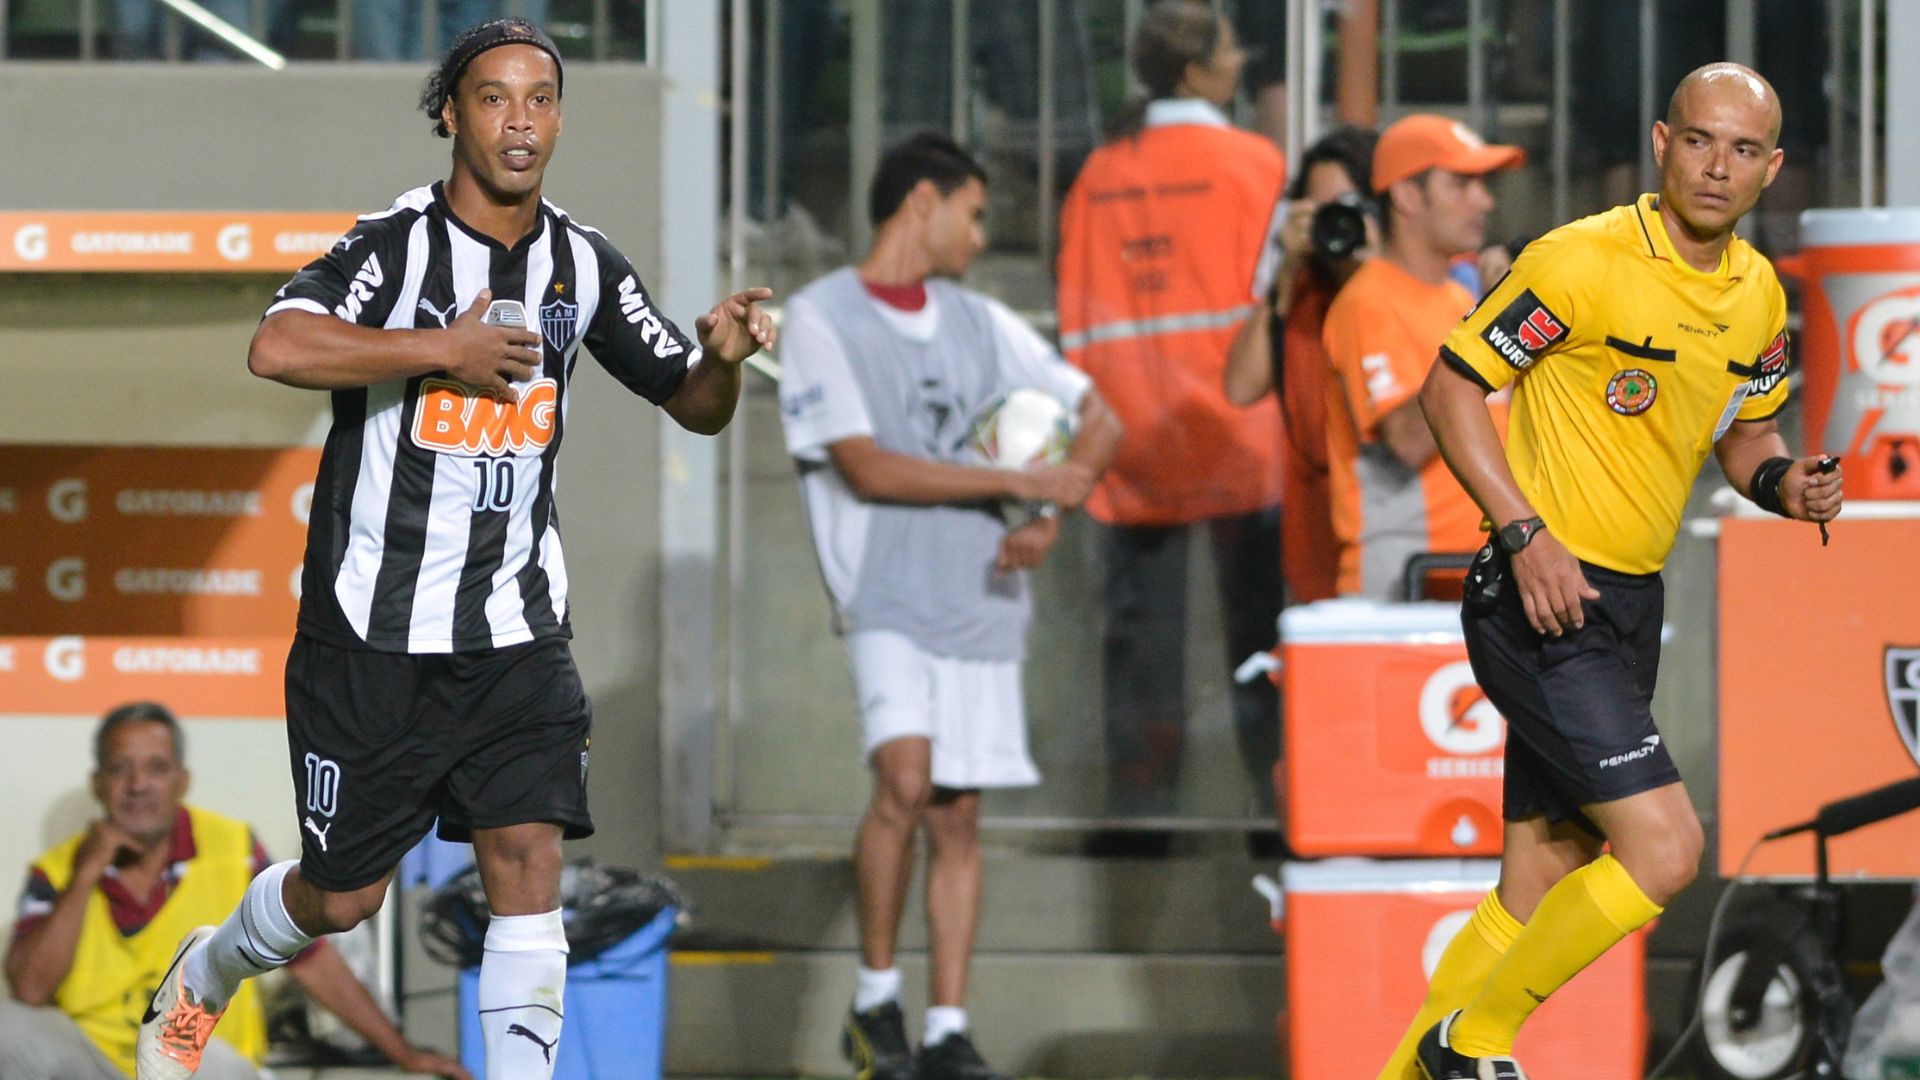 Ronaldinho in action for Atlético-MG (Credit: Getty Images)